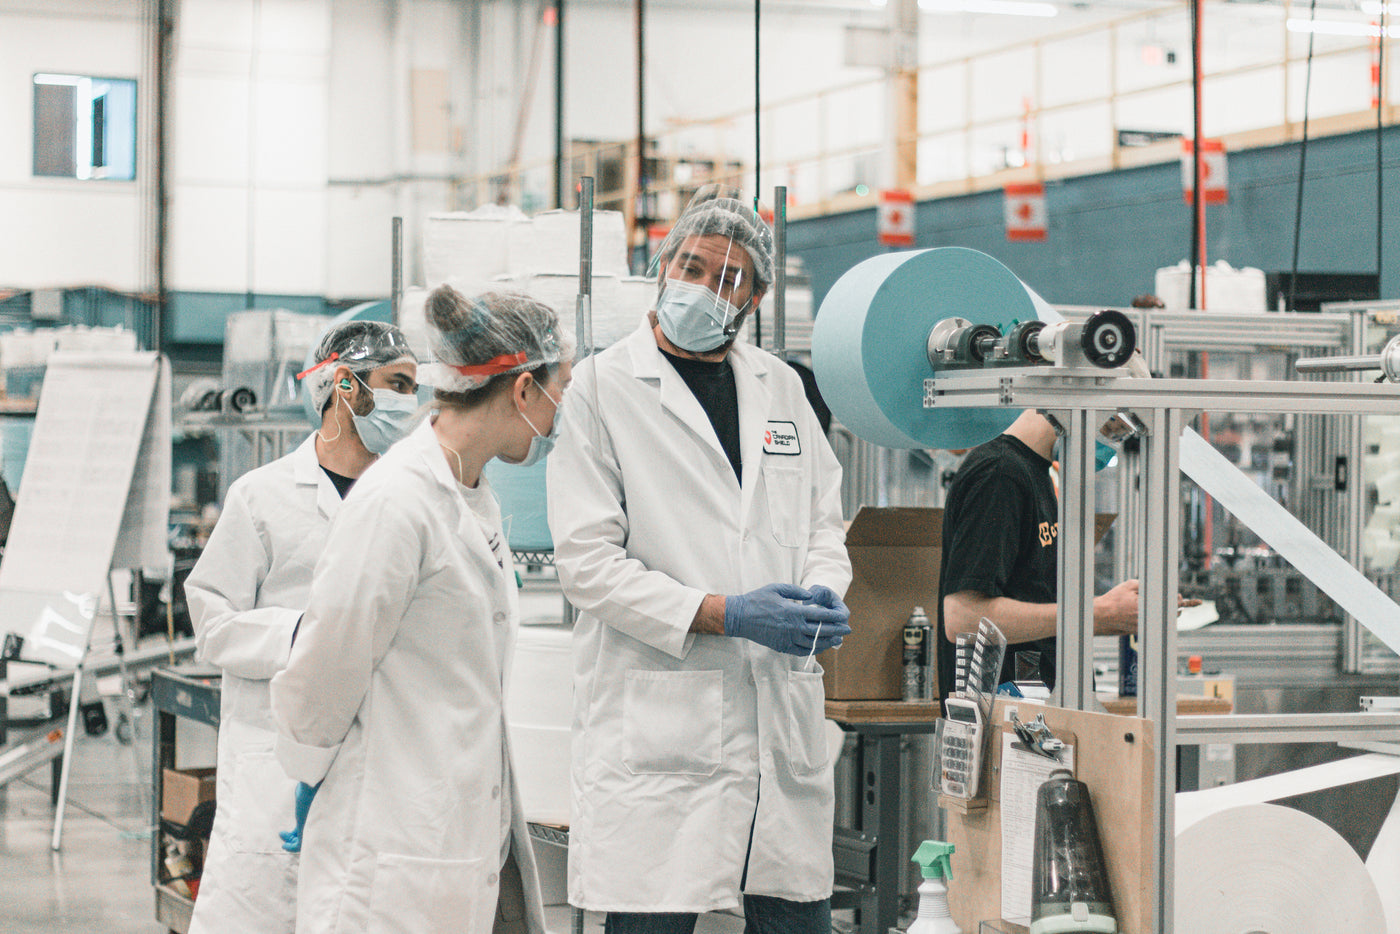 The Canadian Shield Medical Mask Manufacturing Careers